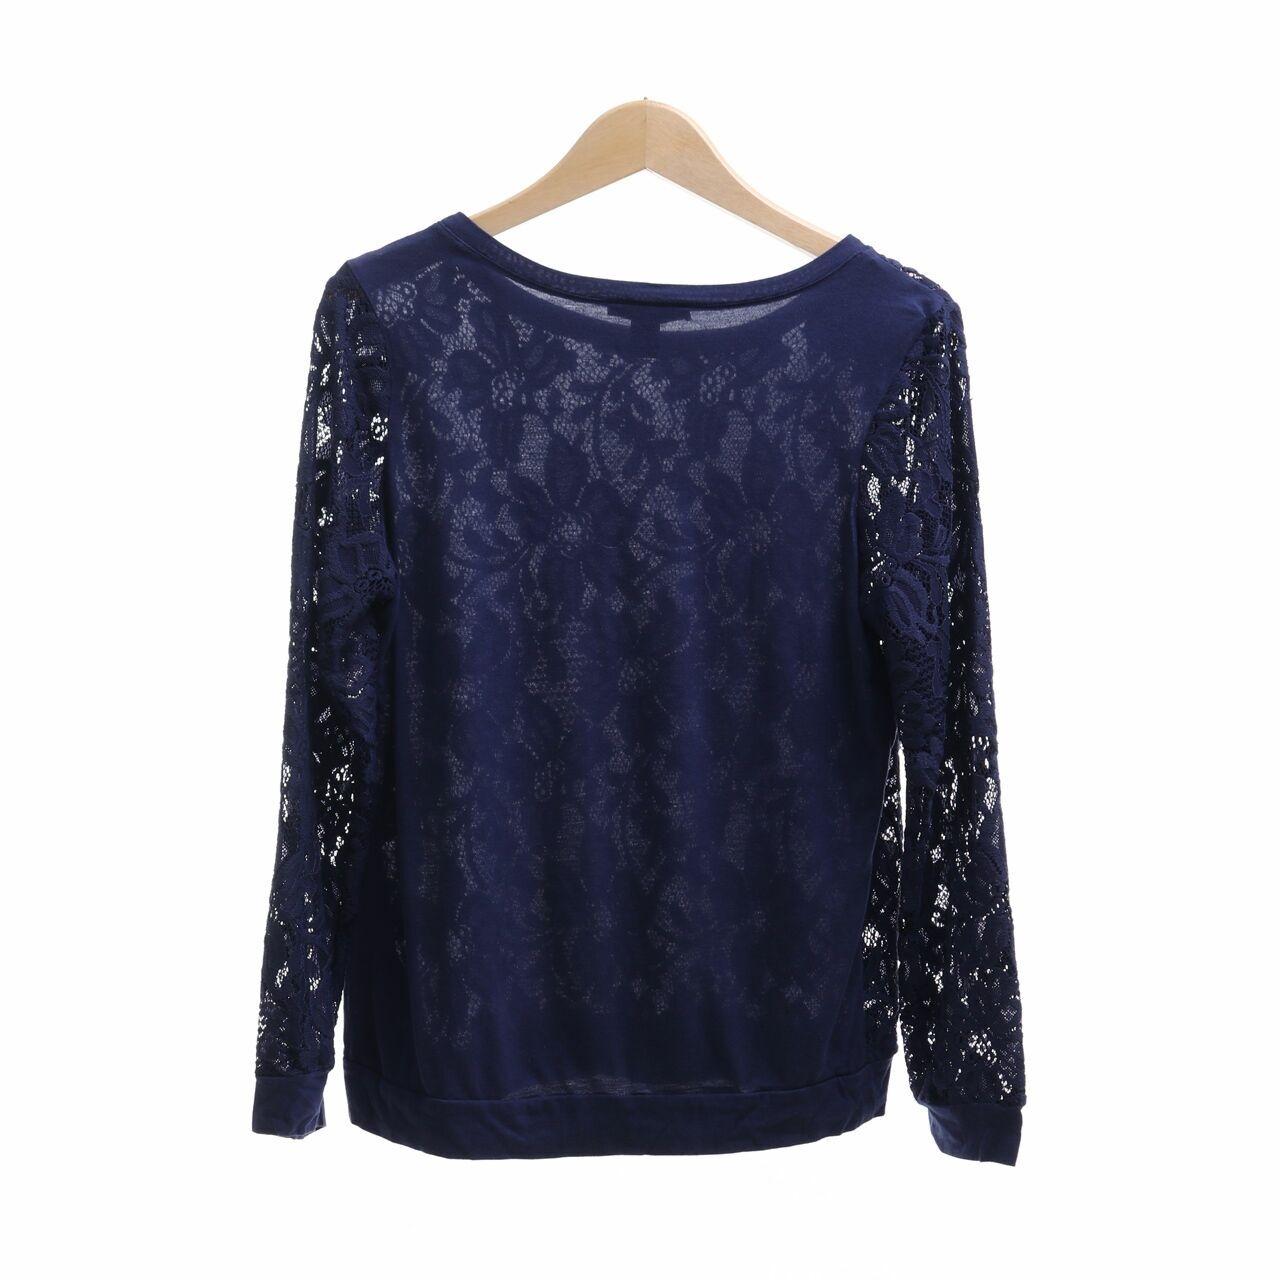 Forever 21 Dark Blue Lace Blouse